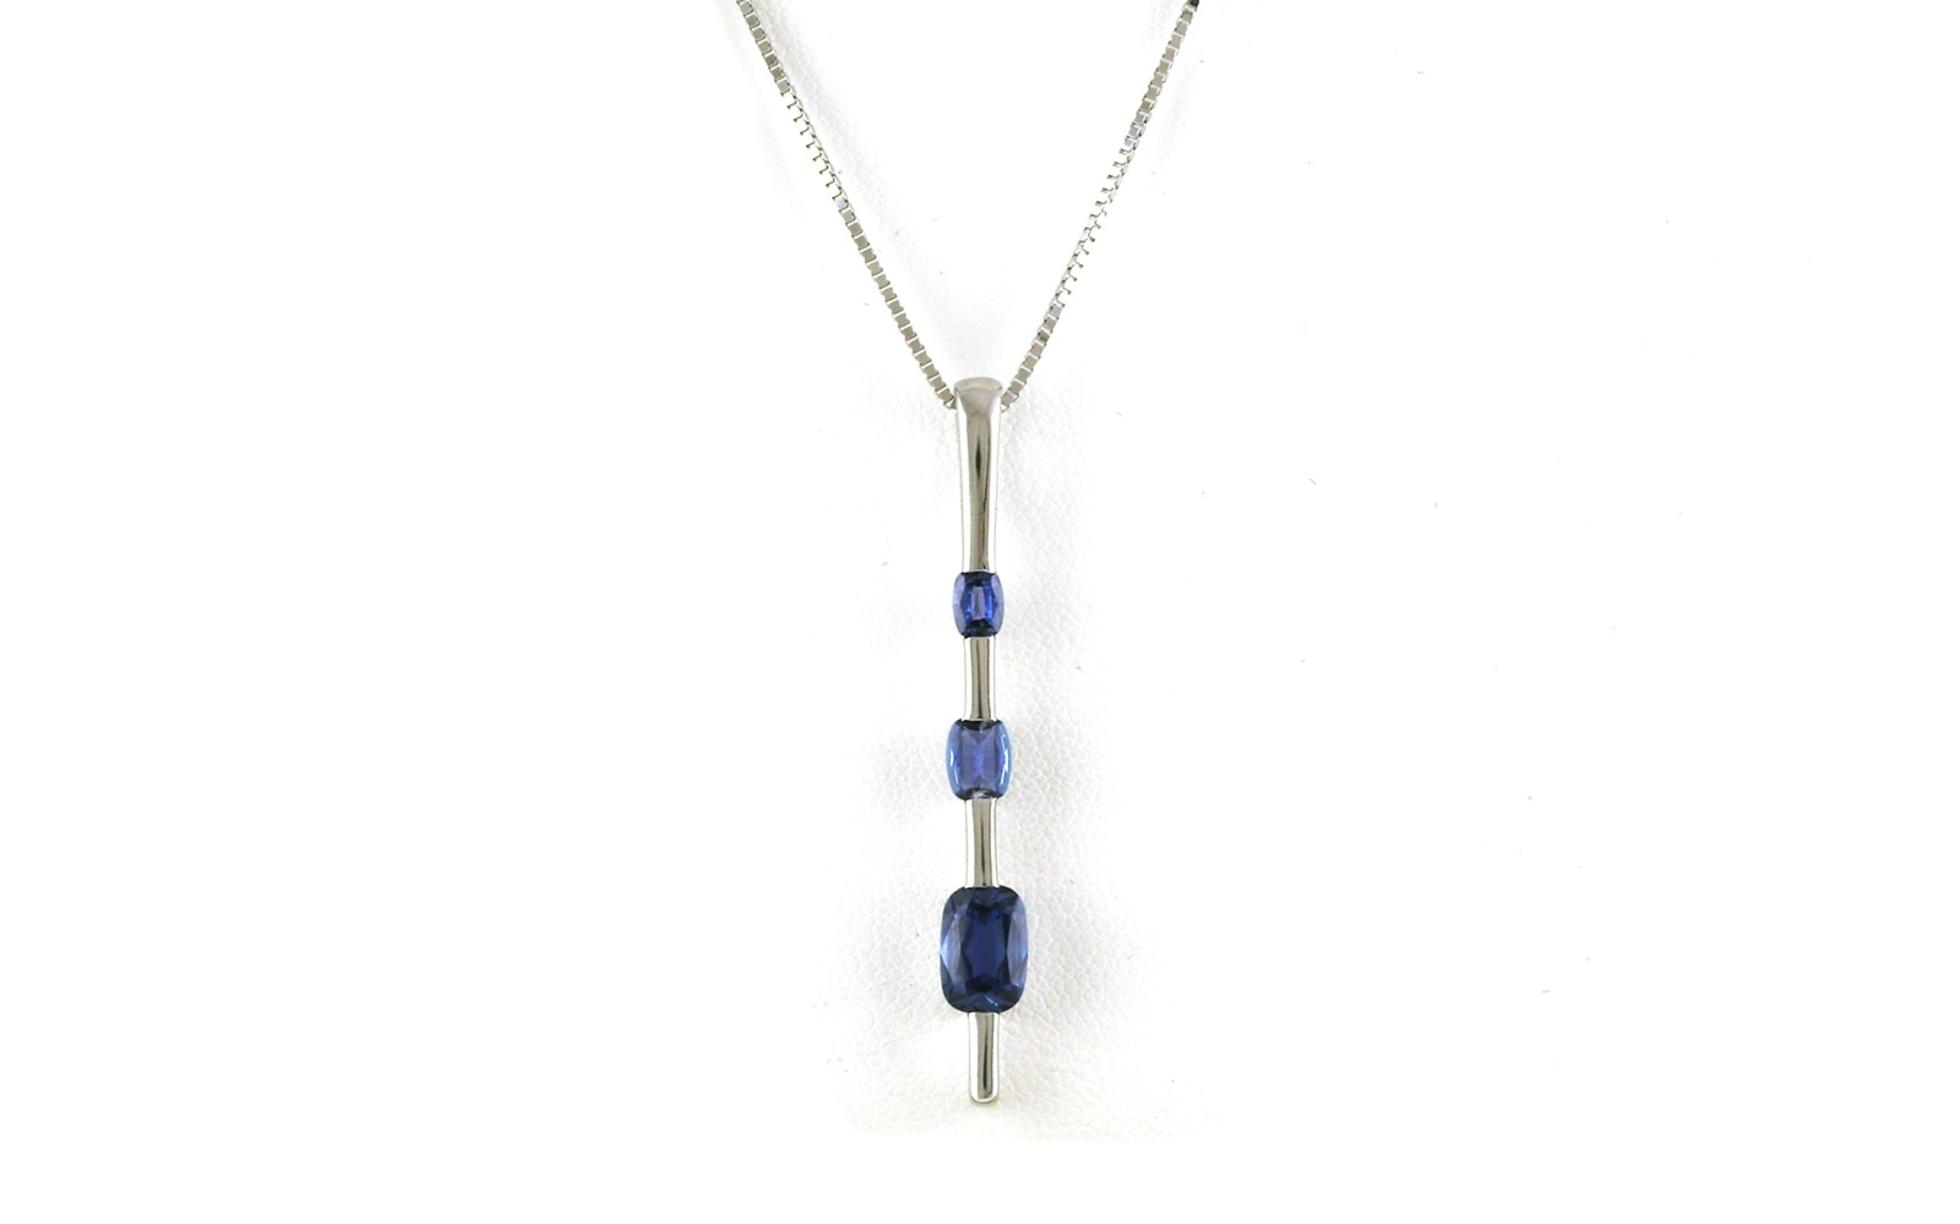 3-Stone Vertical Bar Cushion-cut Montana Yogo Sapphire Necklace in White Gold (1.58cts TWT)